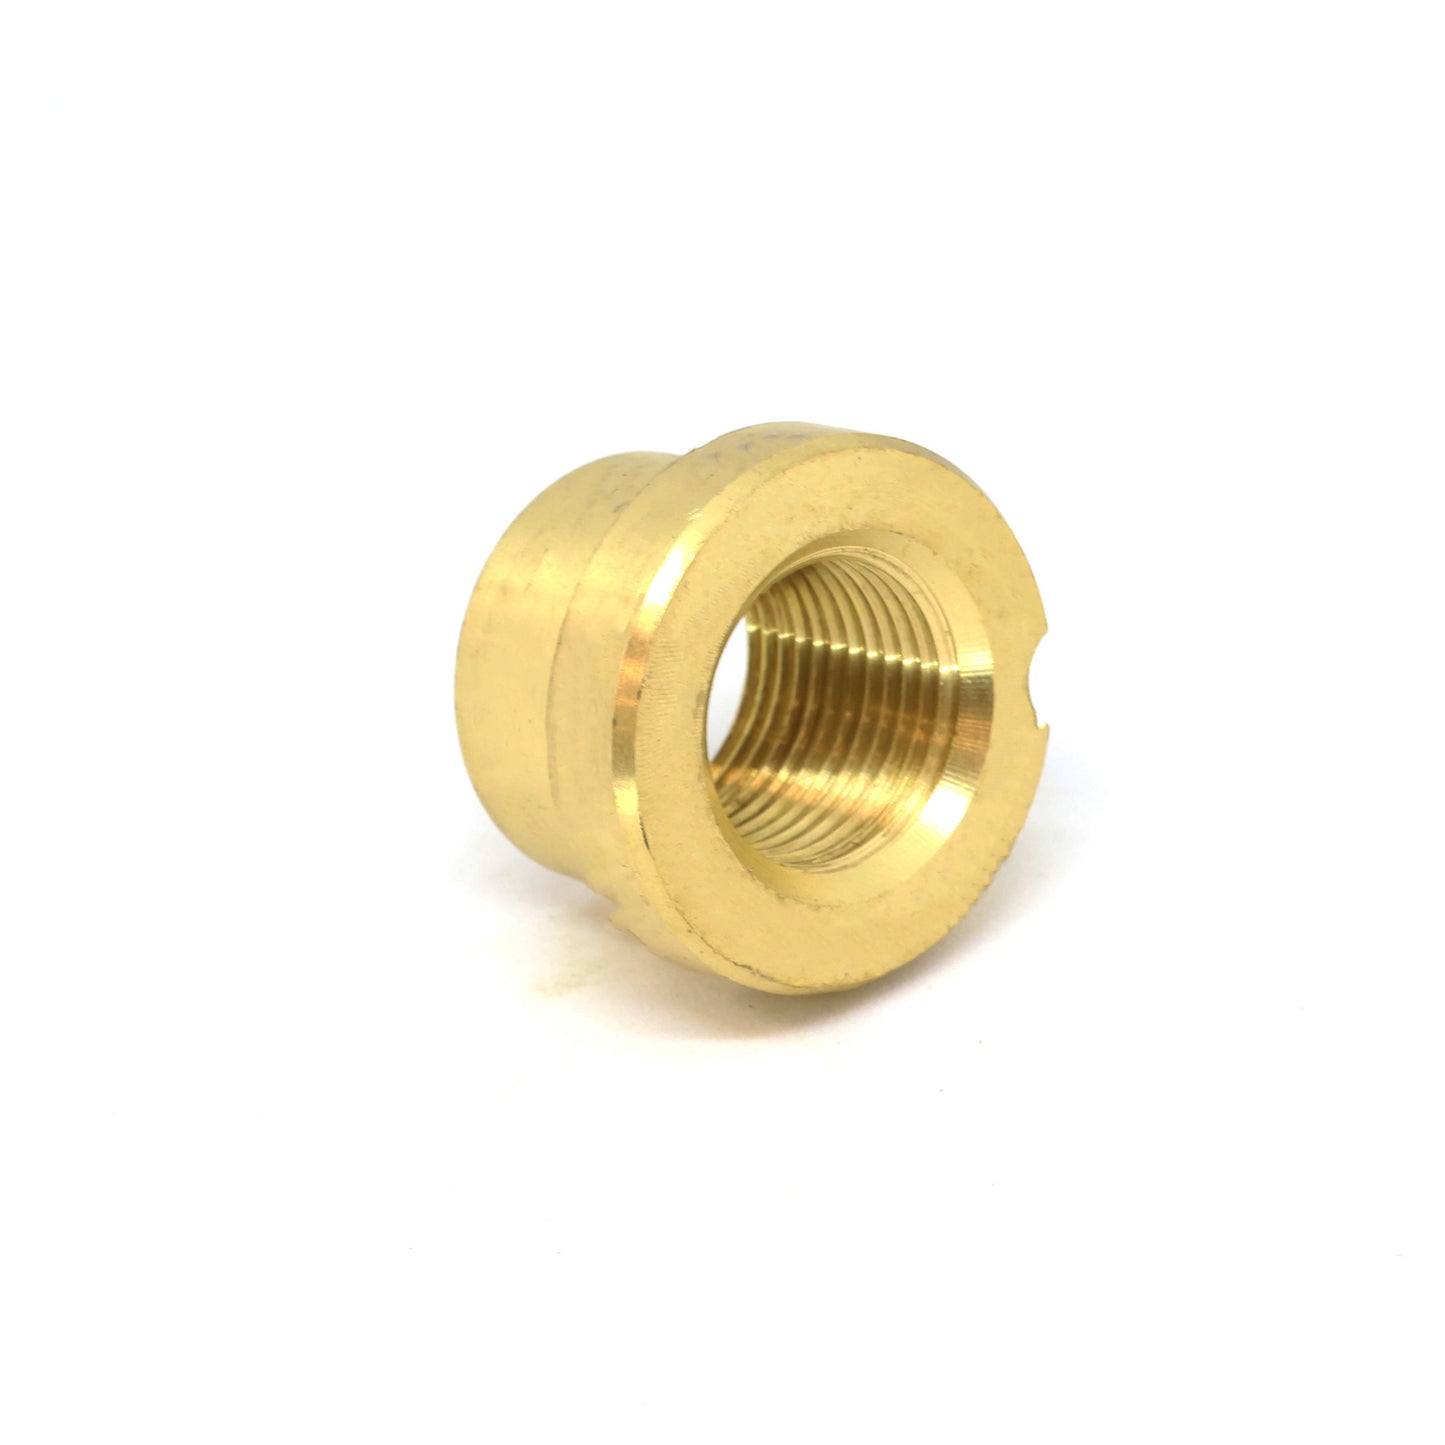 Shaft Bushing - 3/4" Round w/ Notch (Complete with Dowel Pin)